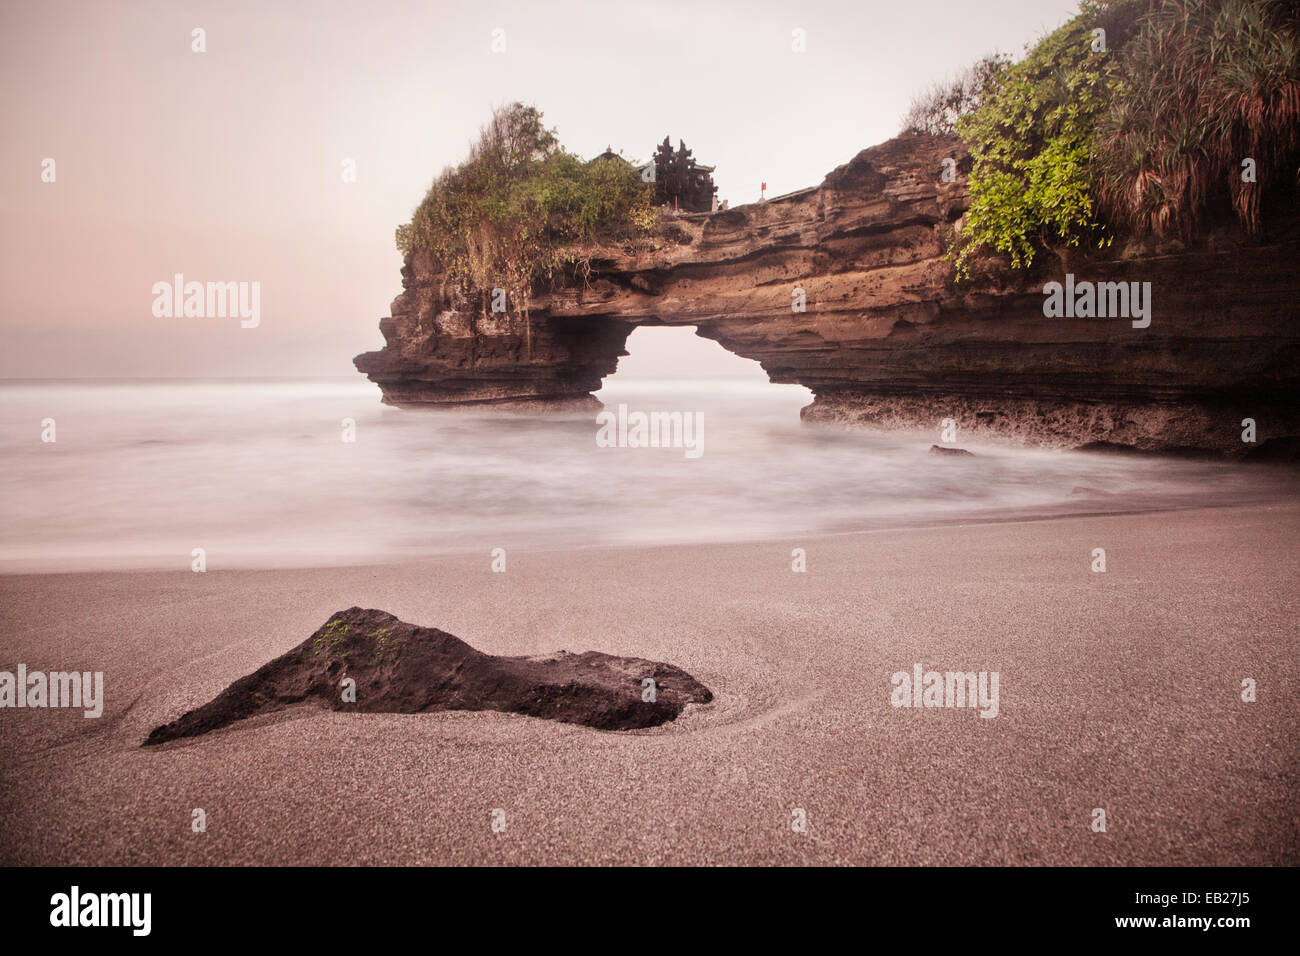 Geological phenomenon and natural rock arch with beach and incoming tide at Tanah Lot Temple in Bali. Stunning long exposure seascape image of Karst Stock Photo